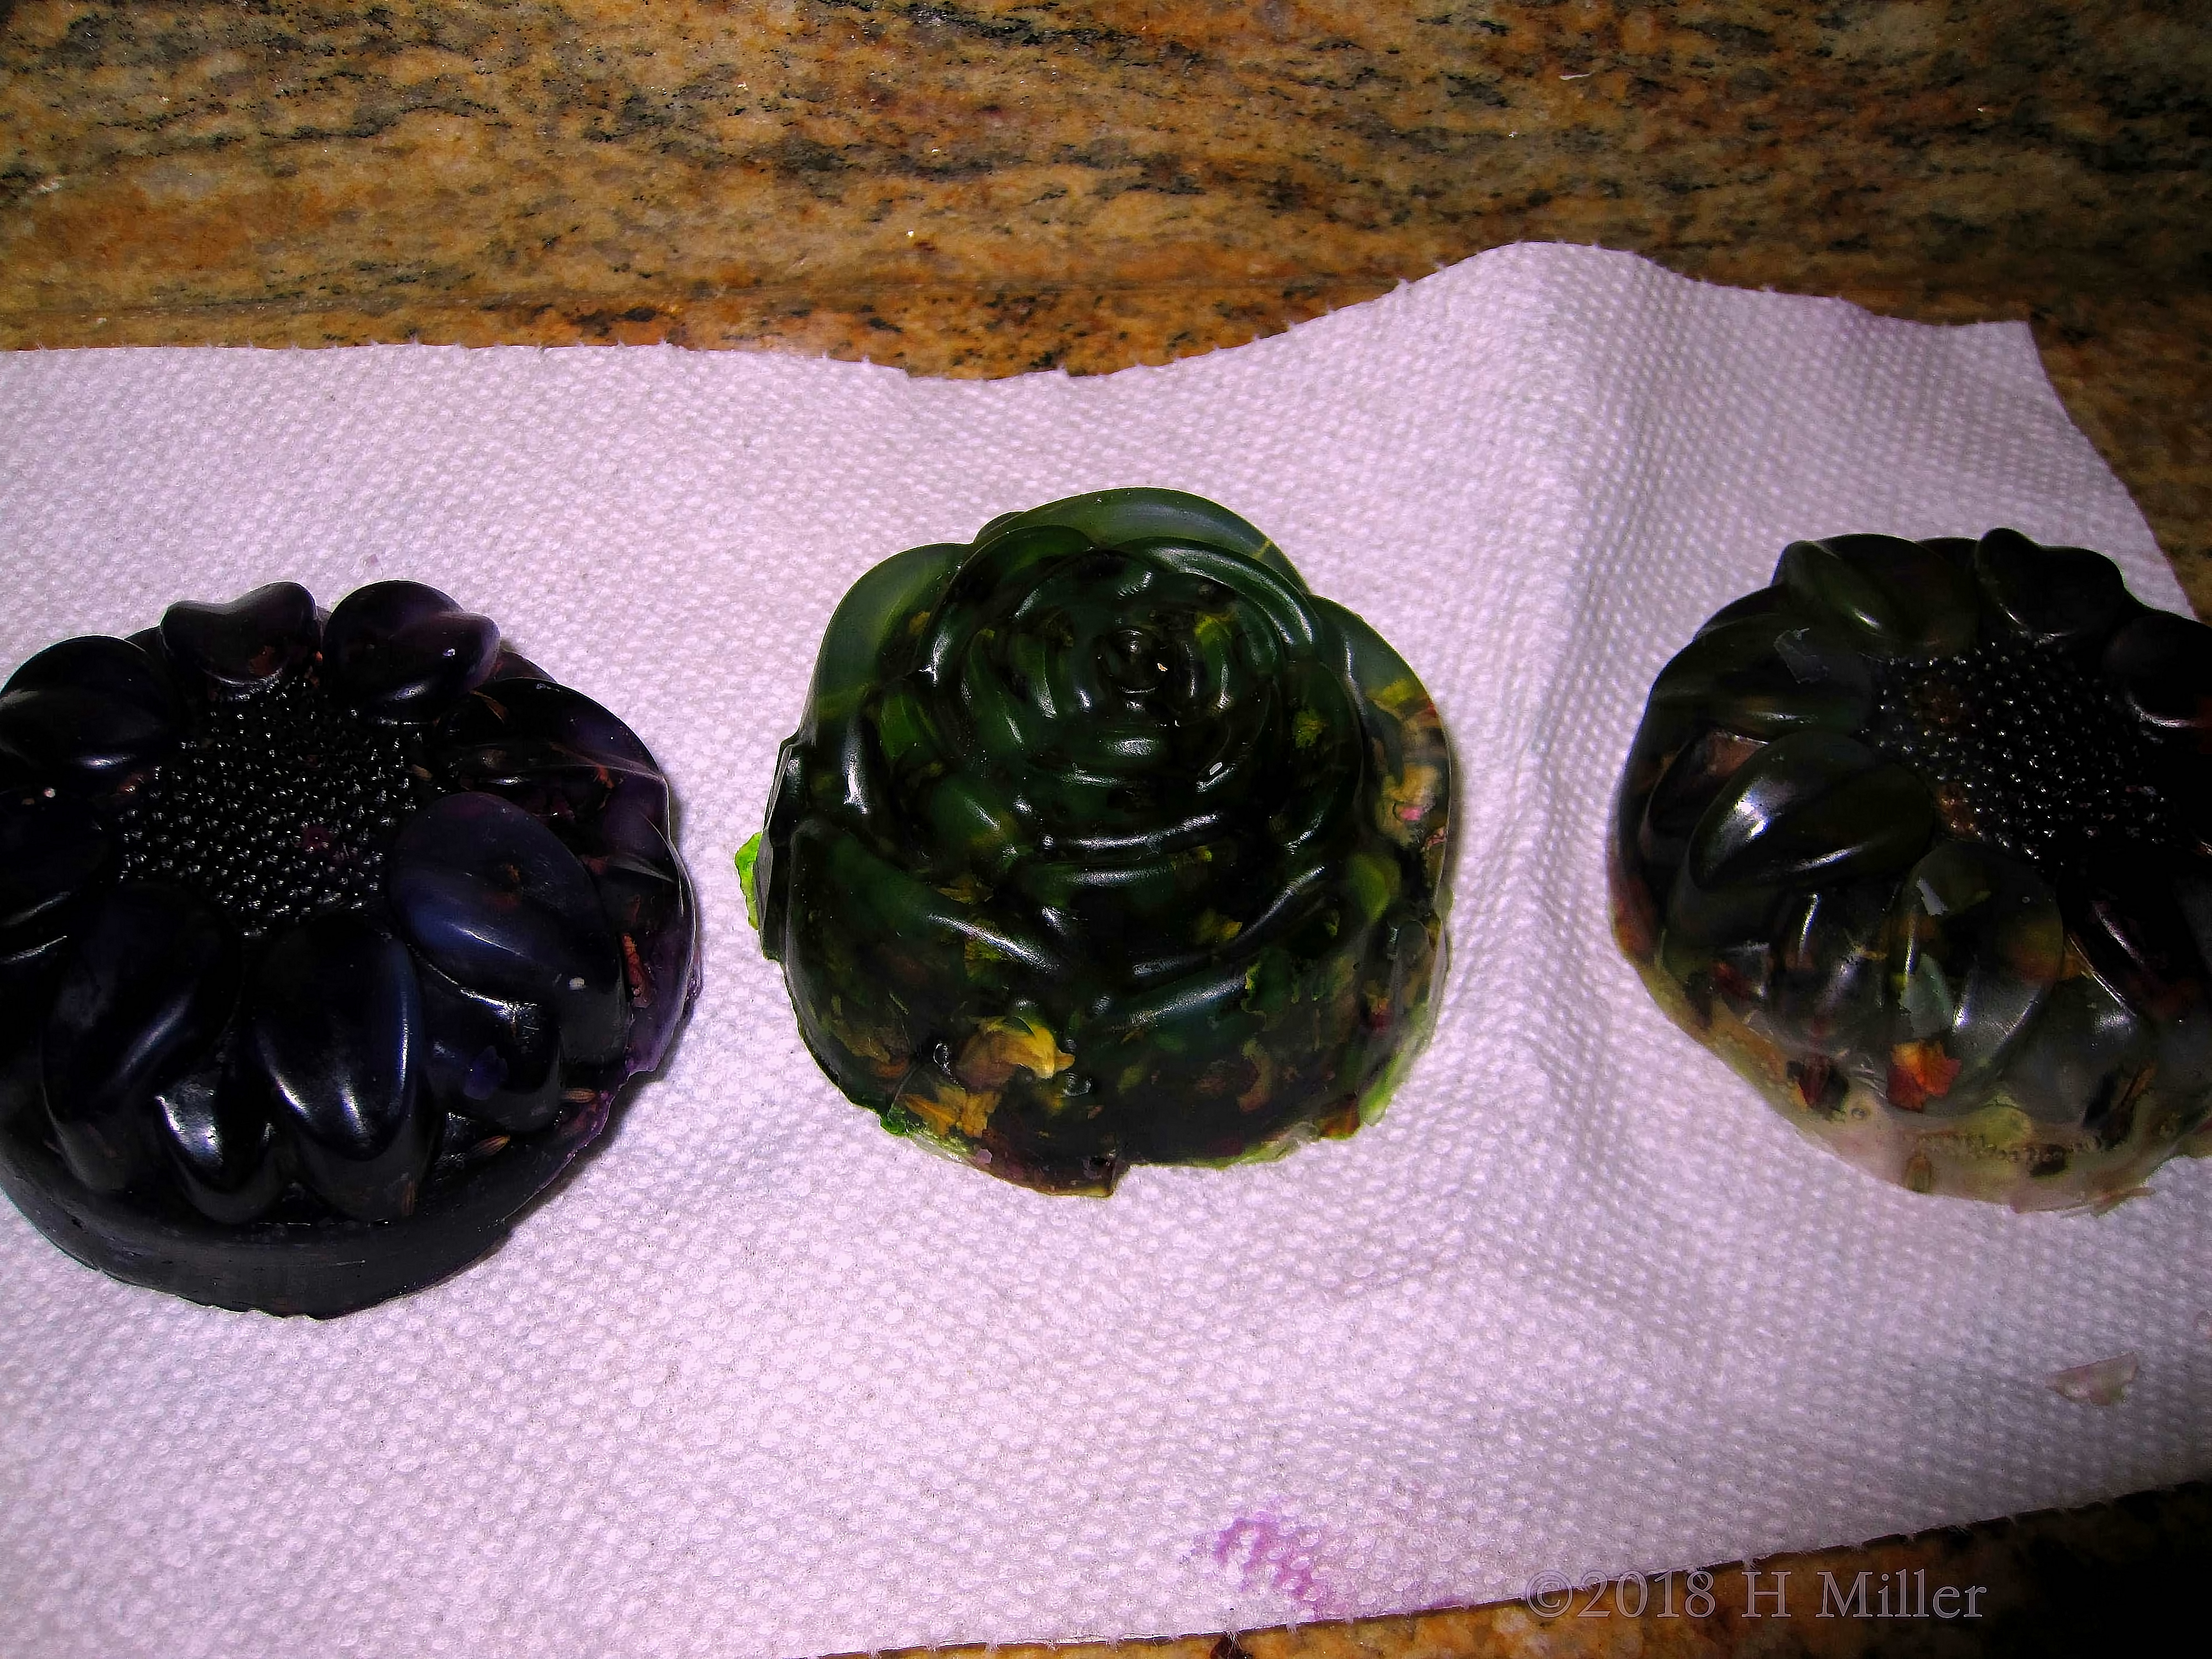 Flower Shaped Kids Craft Soaps Took A Lot Of Effort, And They Look Perfect! 4